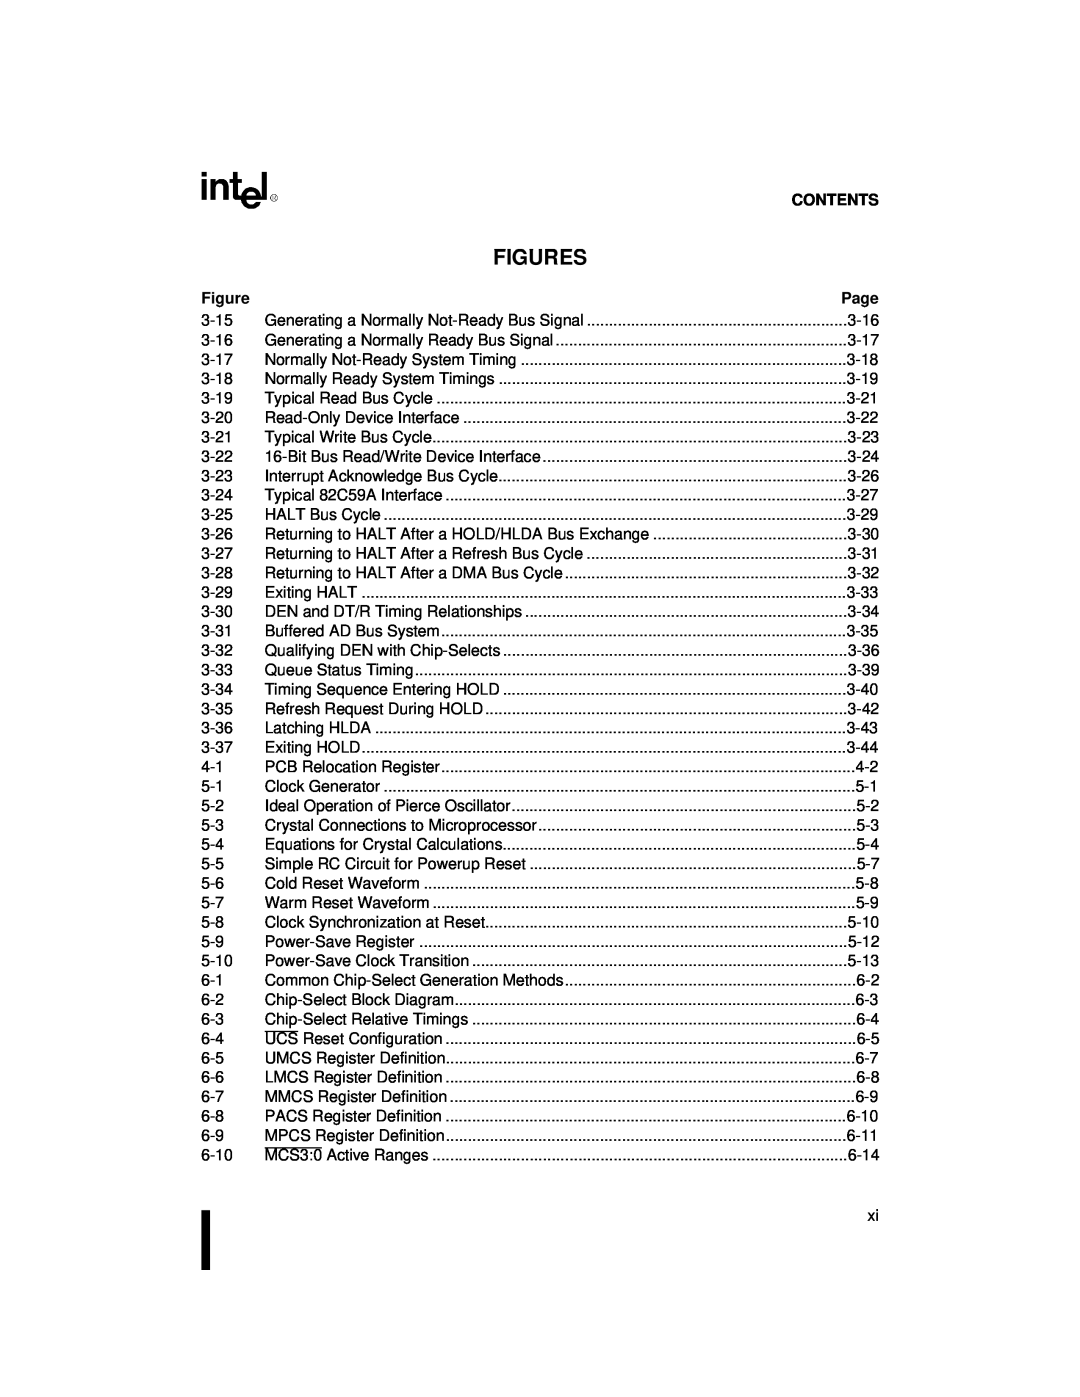 Intel 80C188XL, 80C186XL user manual Figures, Contents, Page, 3-15 